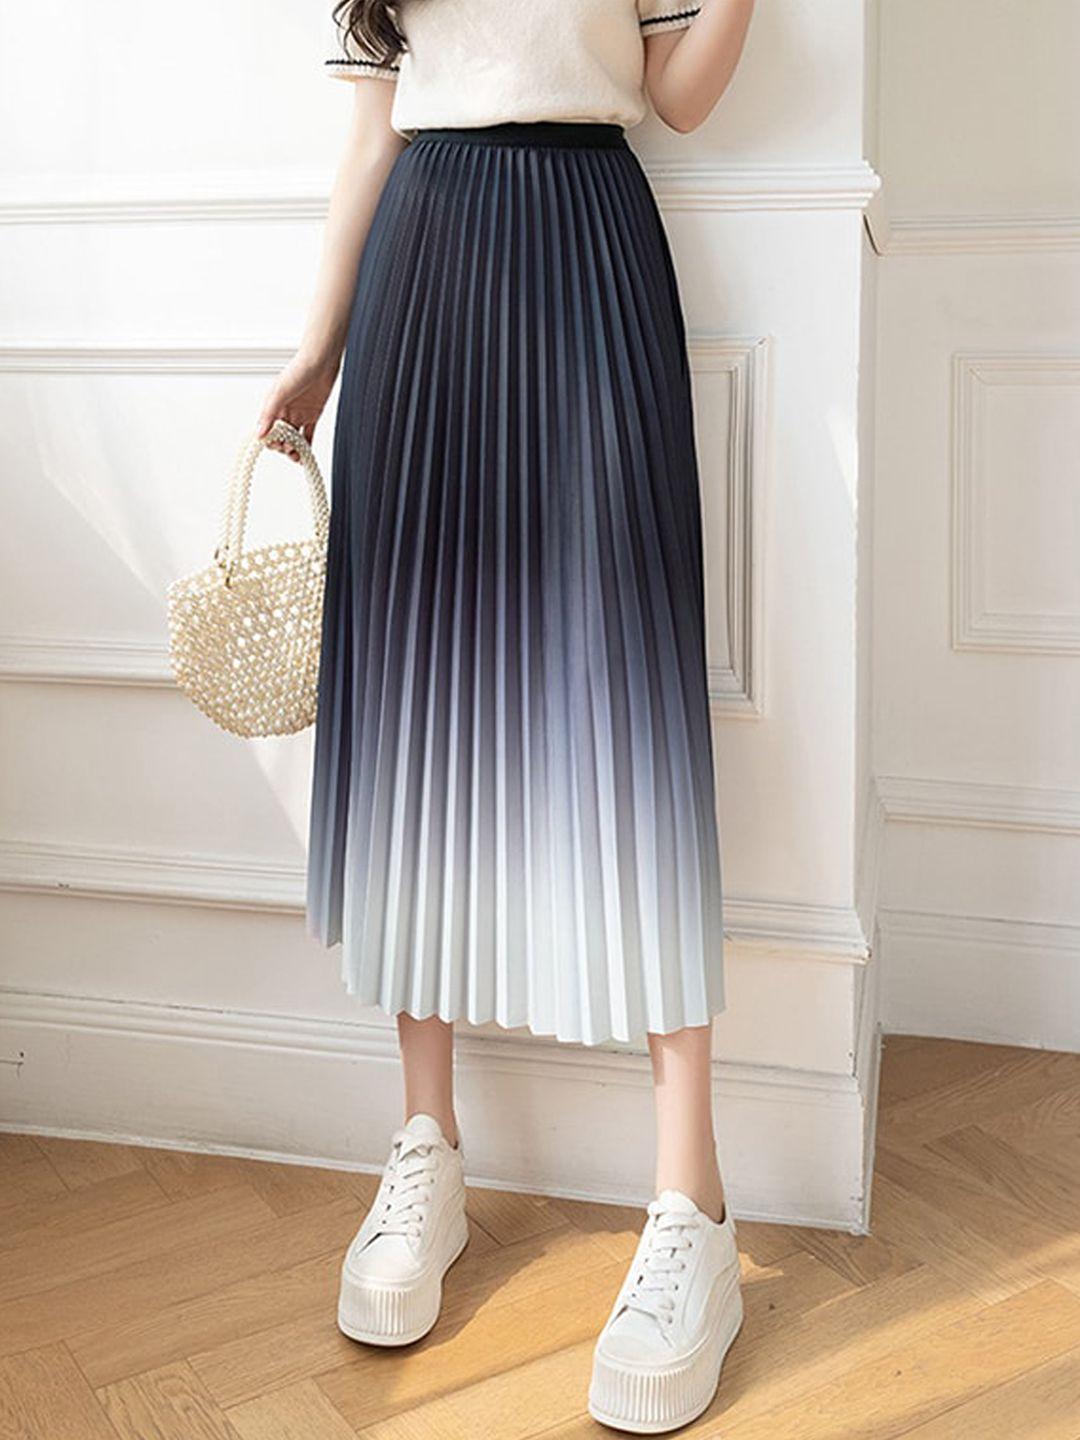 stylecast blue ombre dyed accordion pleats midi flared skirt